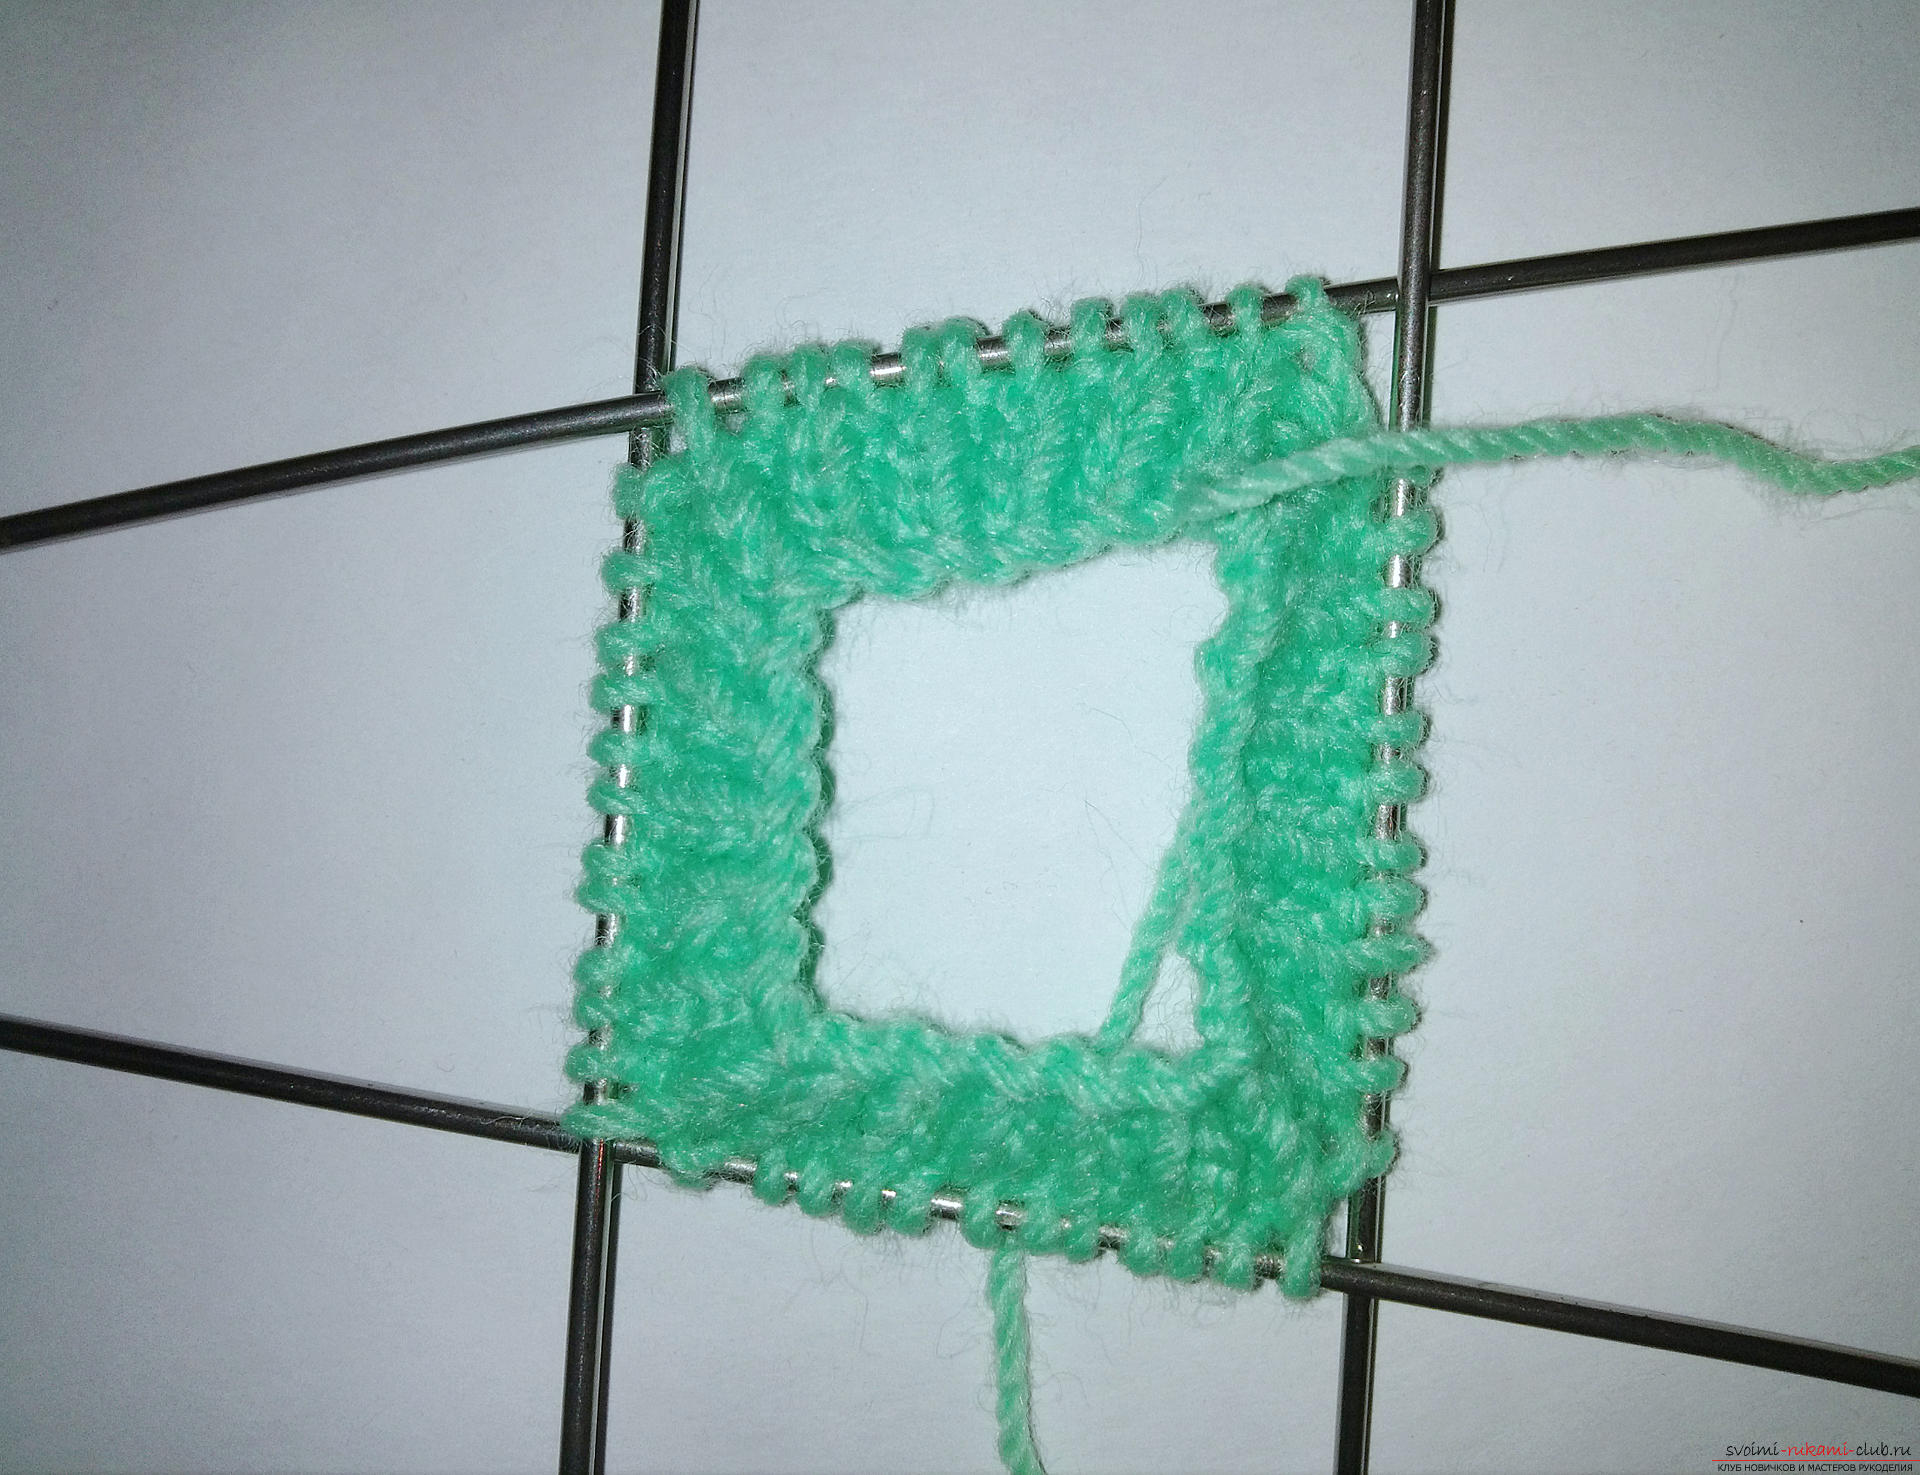 This master class on knitting for beginners will tell you how to learn to knit mittens .. Photo # 2